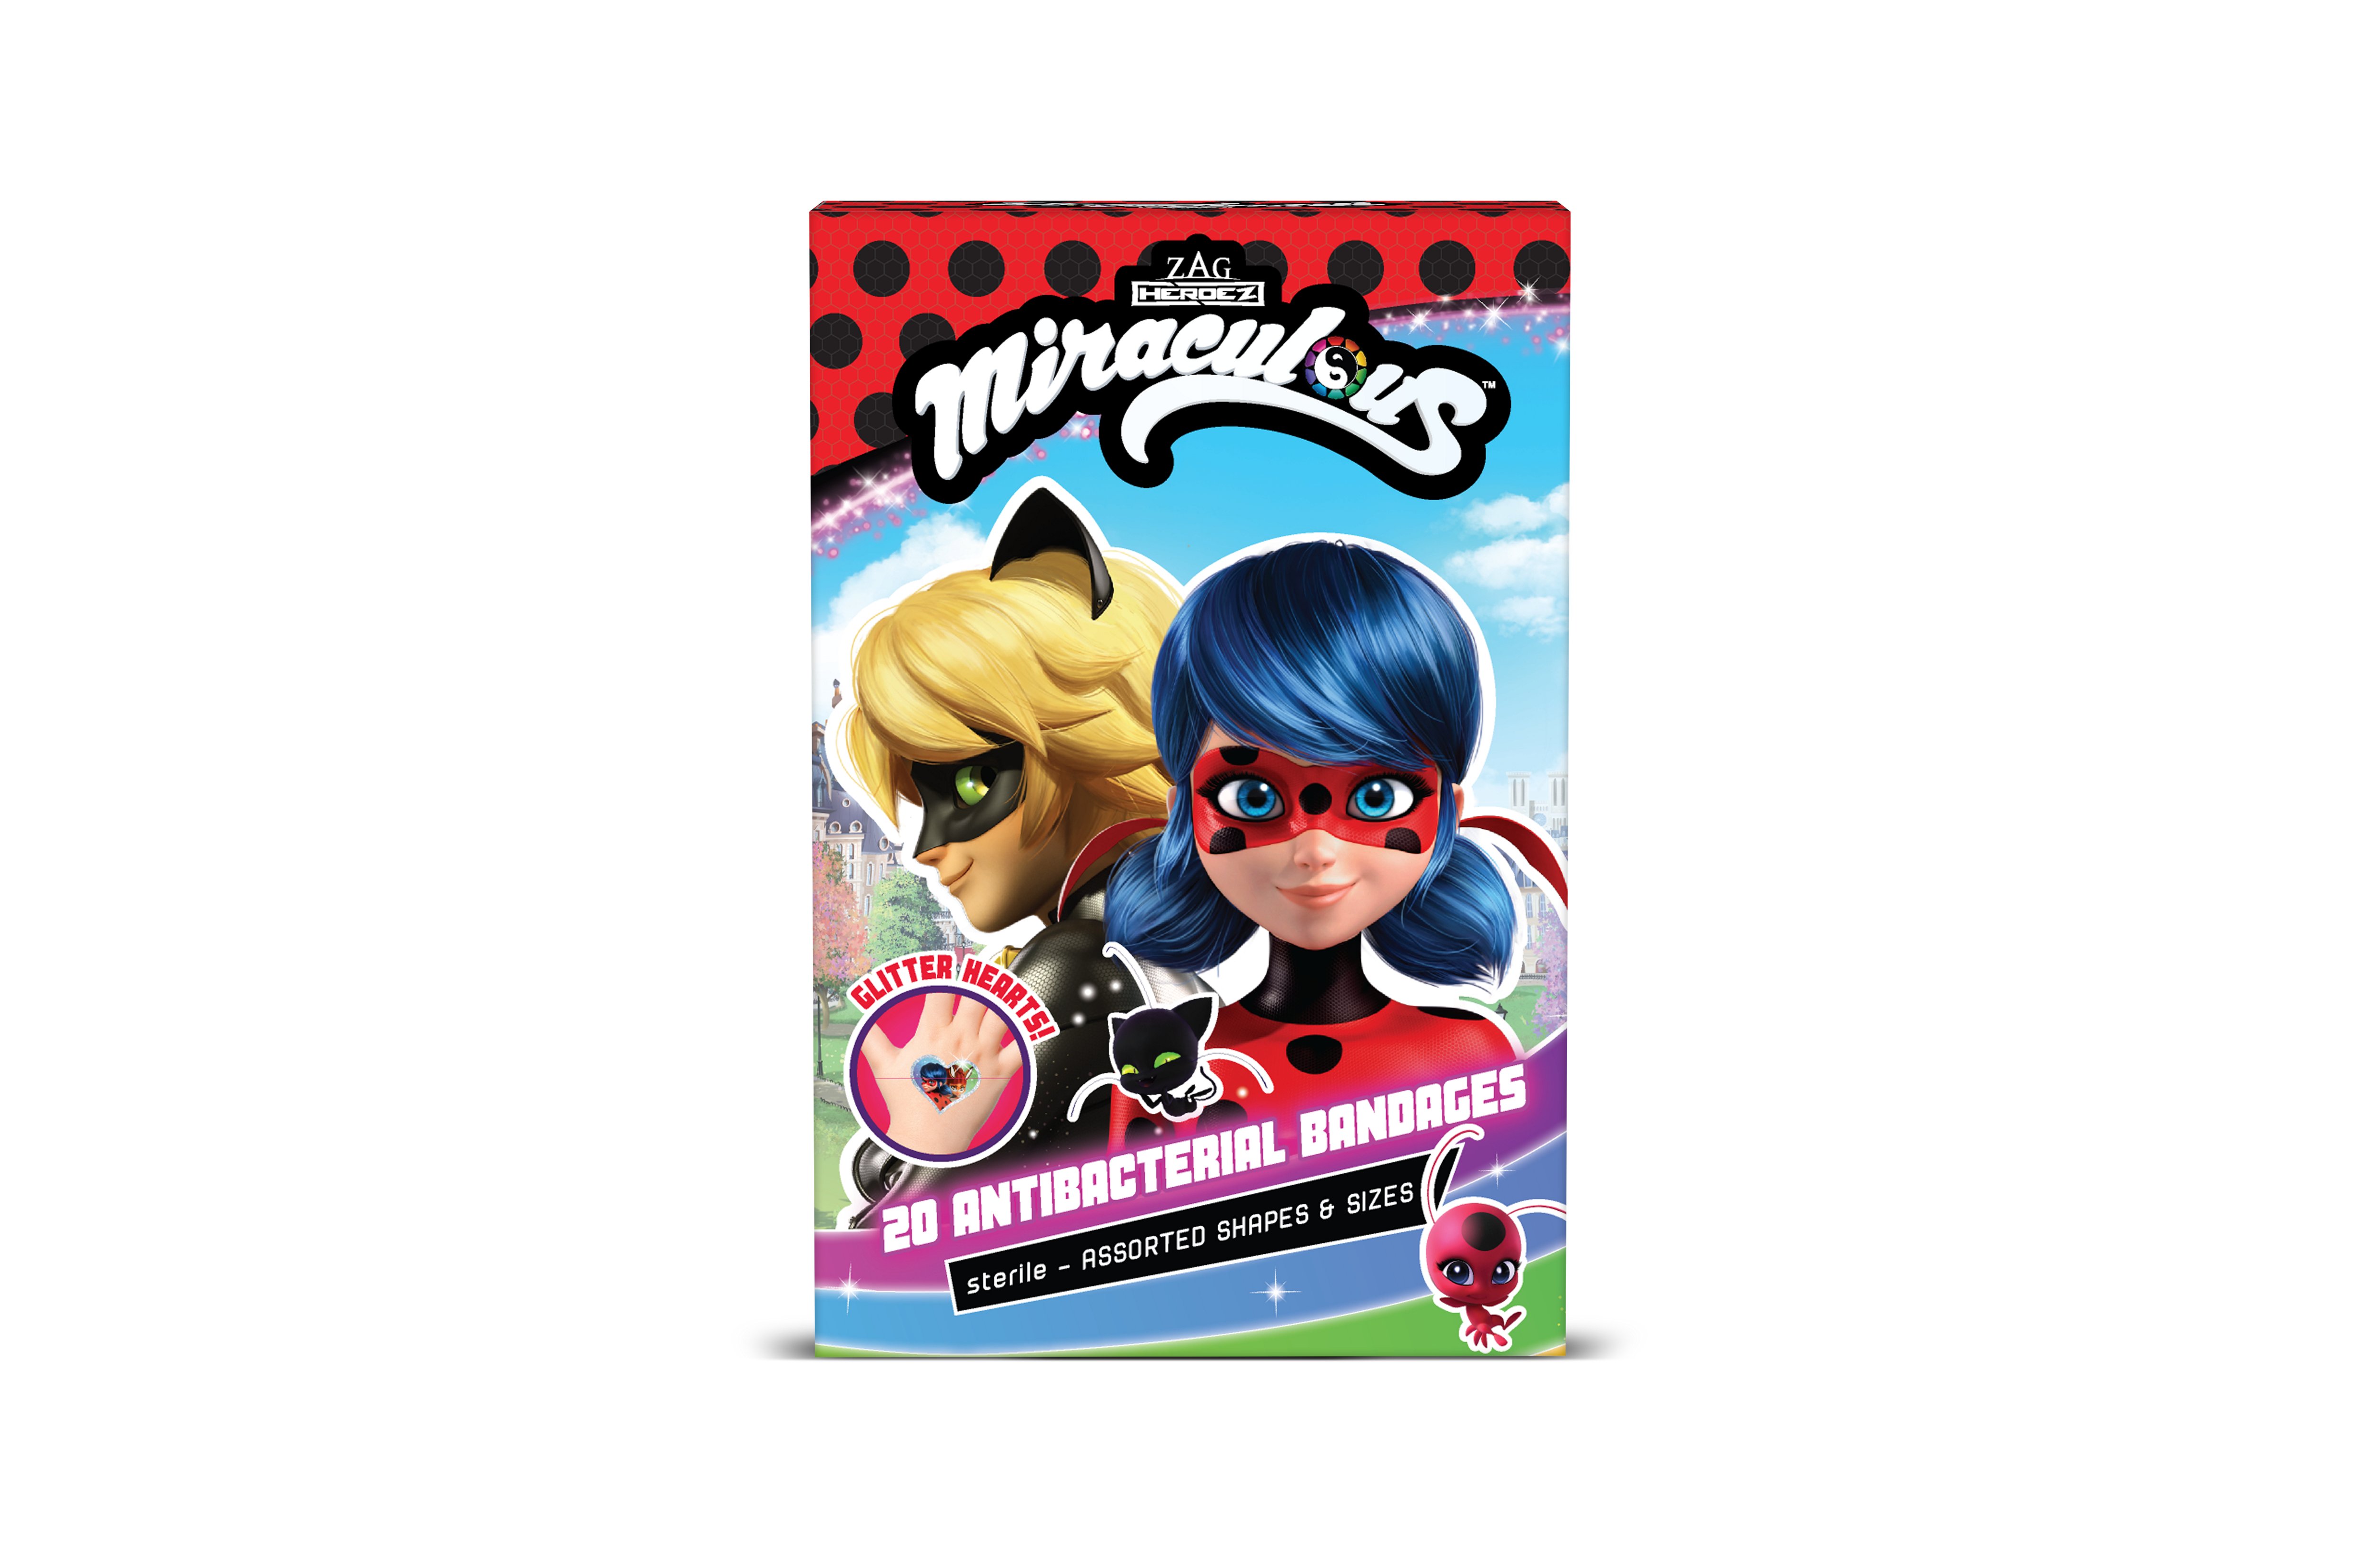 Miraculous: Cat Noir RealBig - Officially Licensed Zag Removable Adhes –  Fathead